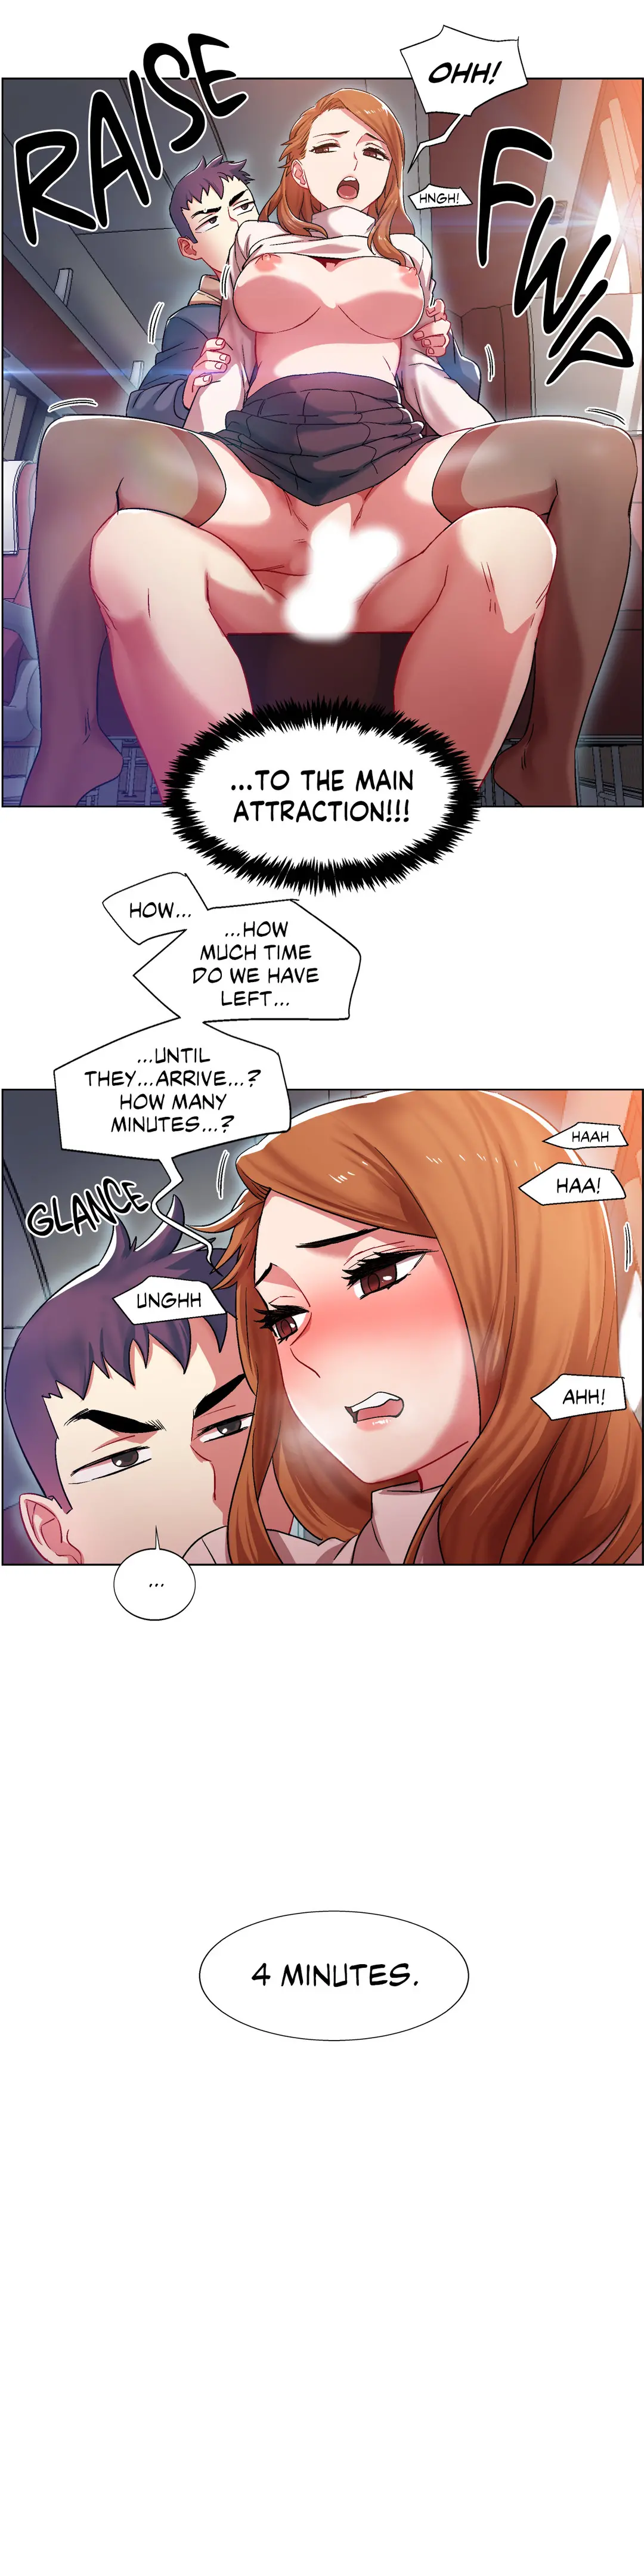 Rental Girls - Chapter 6 Page 8